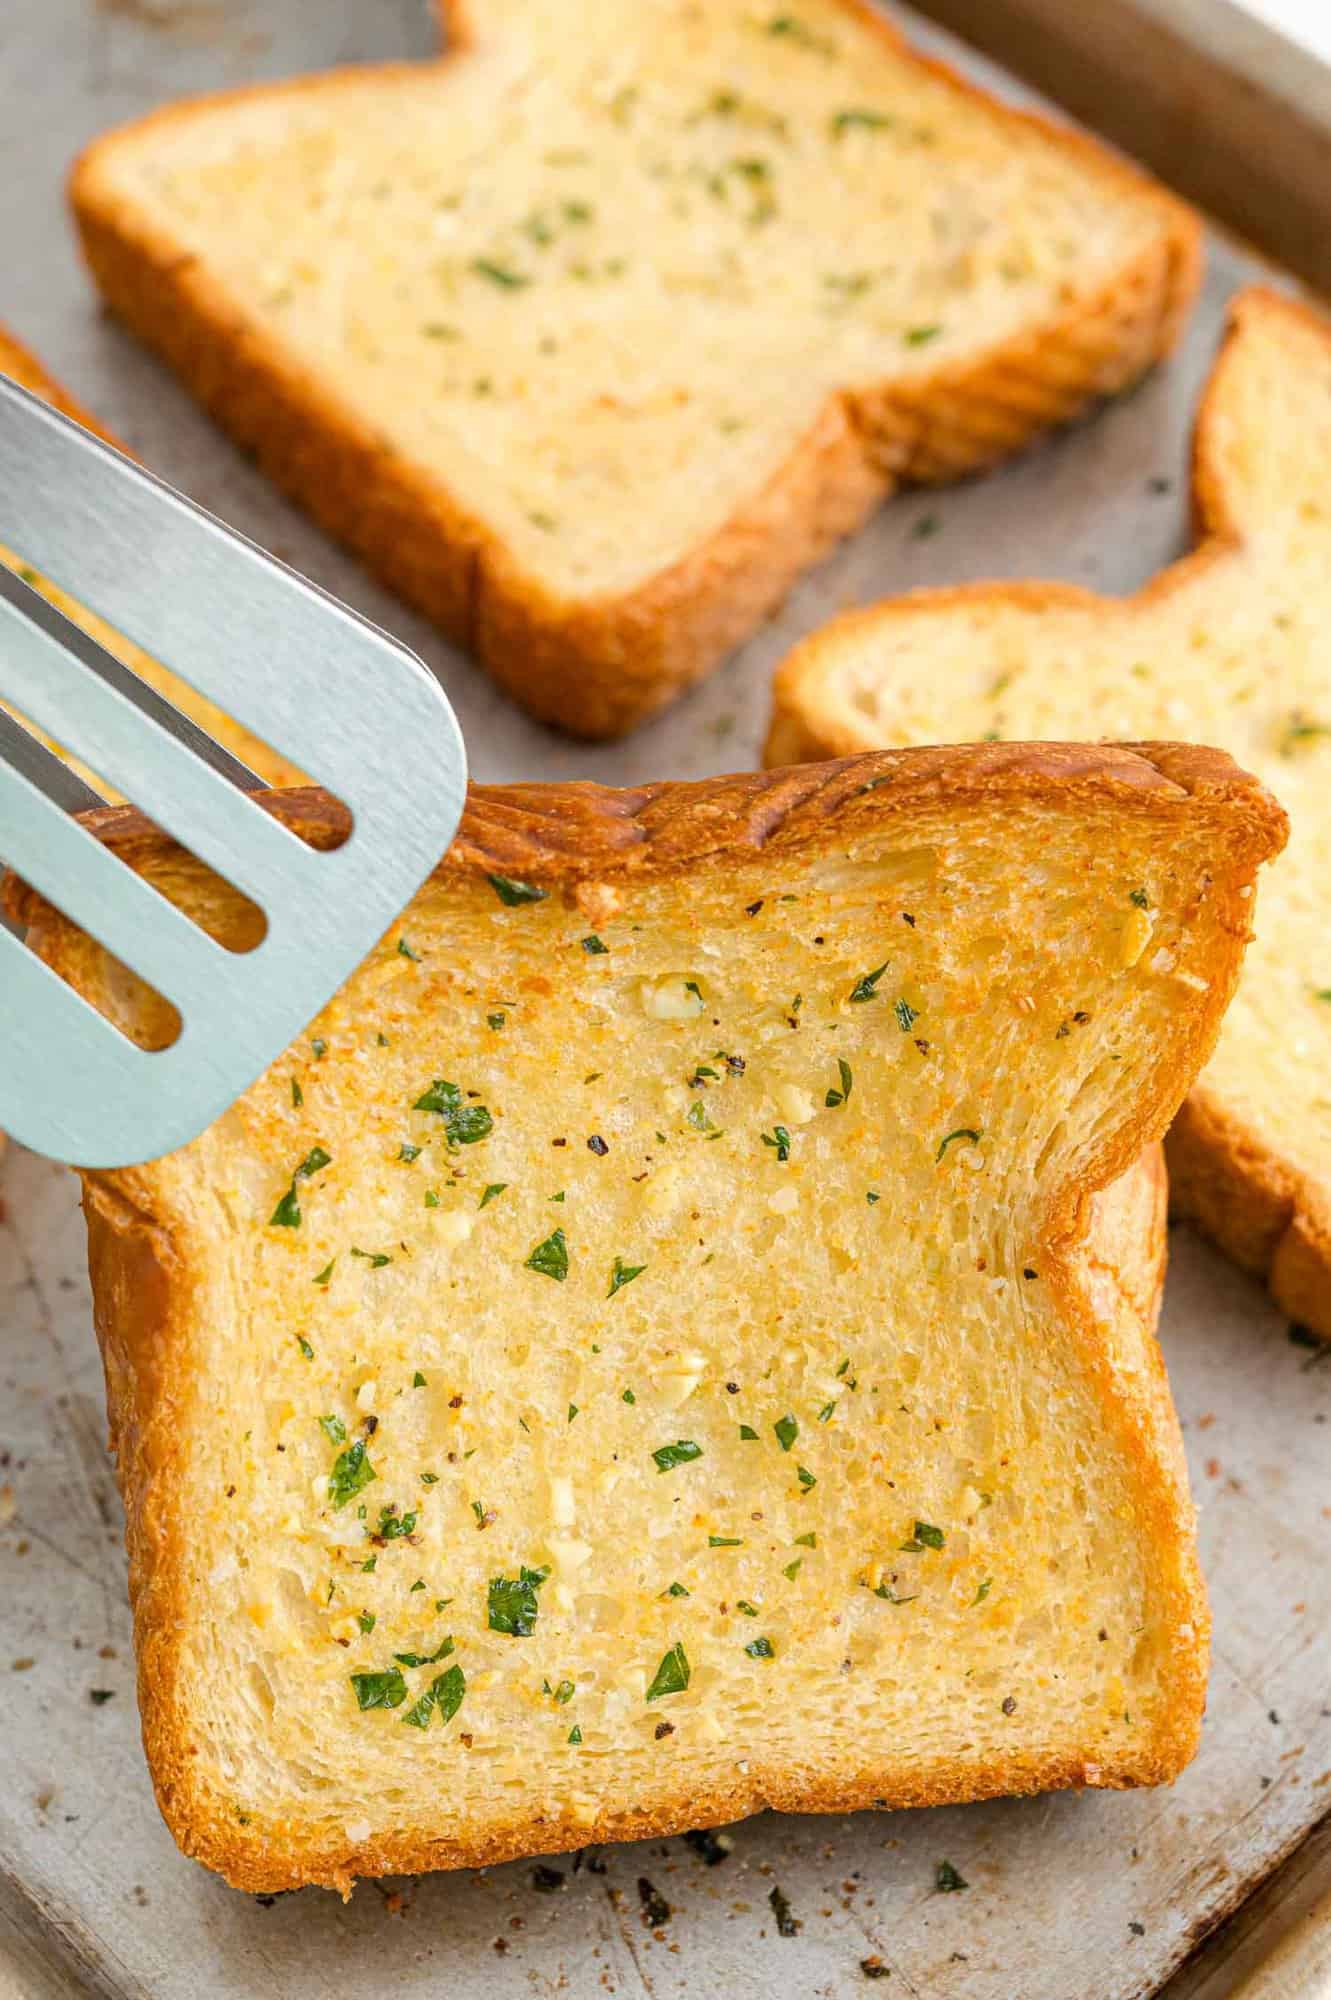 A pair of tongs picks up a slice of Texas toast garlic bread from a baking sheet.